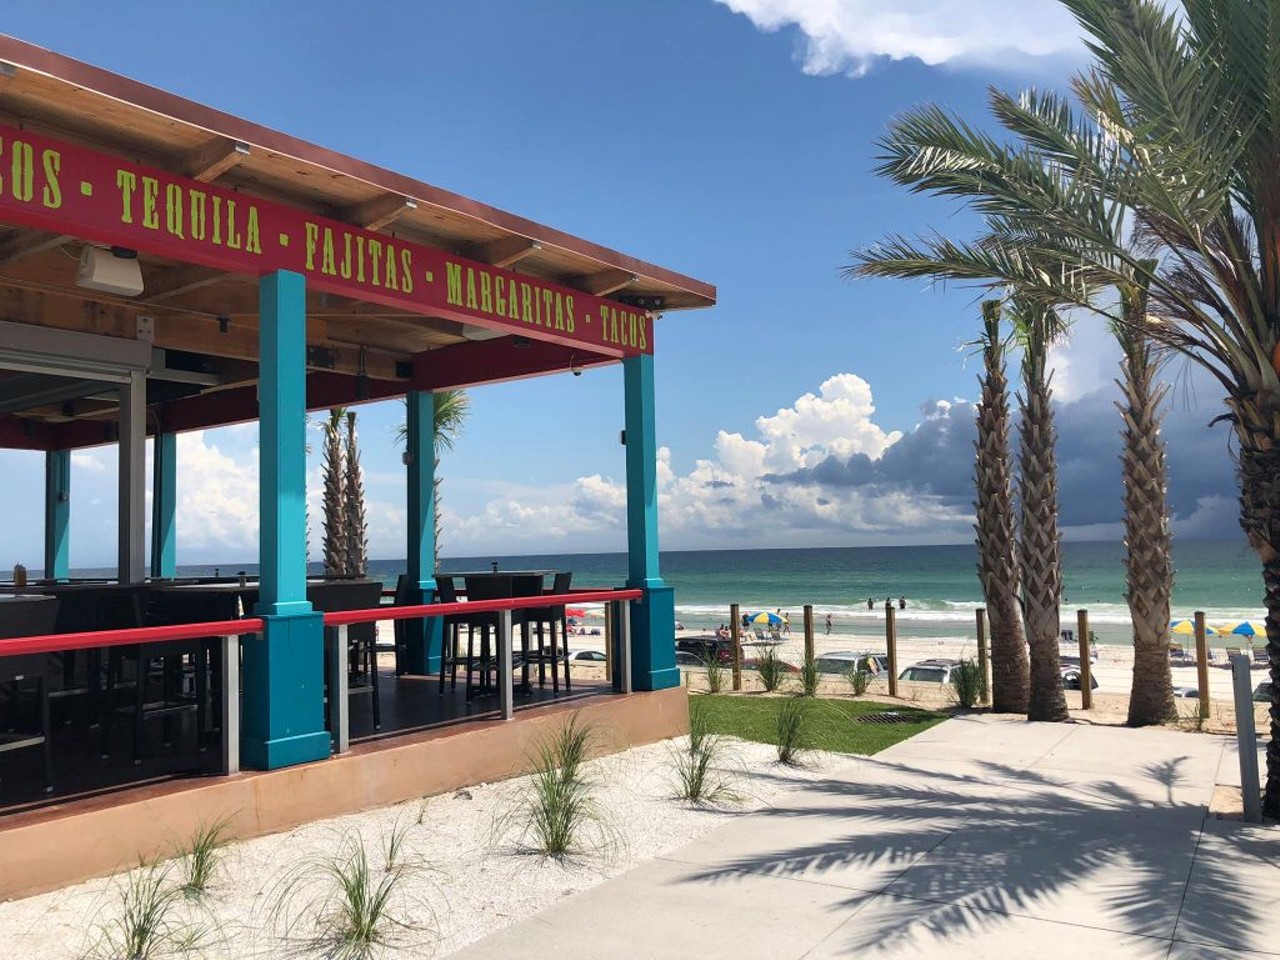 Cocina 214
451 S Atlantic Ave., Daytona Beach, (386) 456-3168
Specializing in authentic Mexican and Tex Mex dishes, this beachfront restaurant aims to bring freshness and flavor to its customers. With Happy Hour specials Monday through Thursday from 4:30 p.m. to 6:30 p.m., spend the day under the sun and start the night with drinks in hand. The restaurant has a front lawn area dedicated for lounging and playing a game of cornhole, also with beach access to bring customers that much closer to the shore.
Photo via Cocina214DaytonaBeach/Facebook